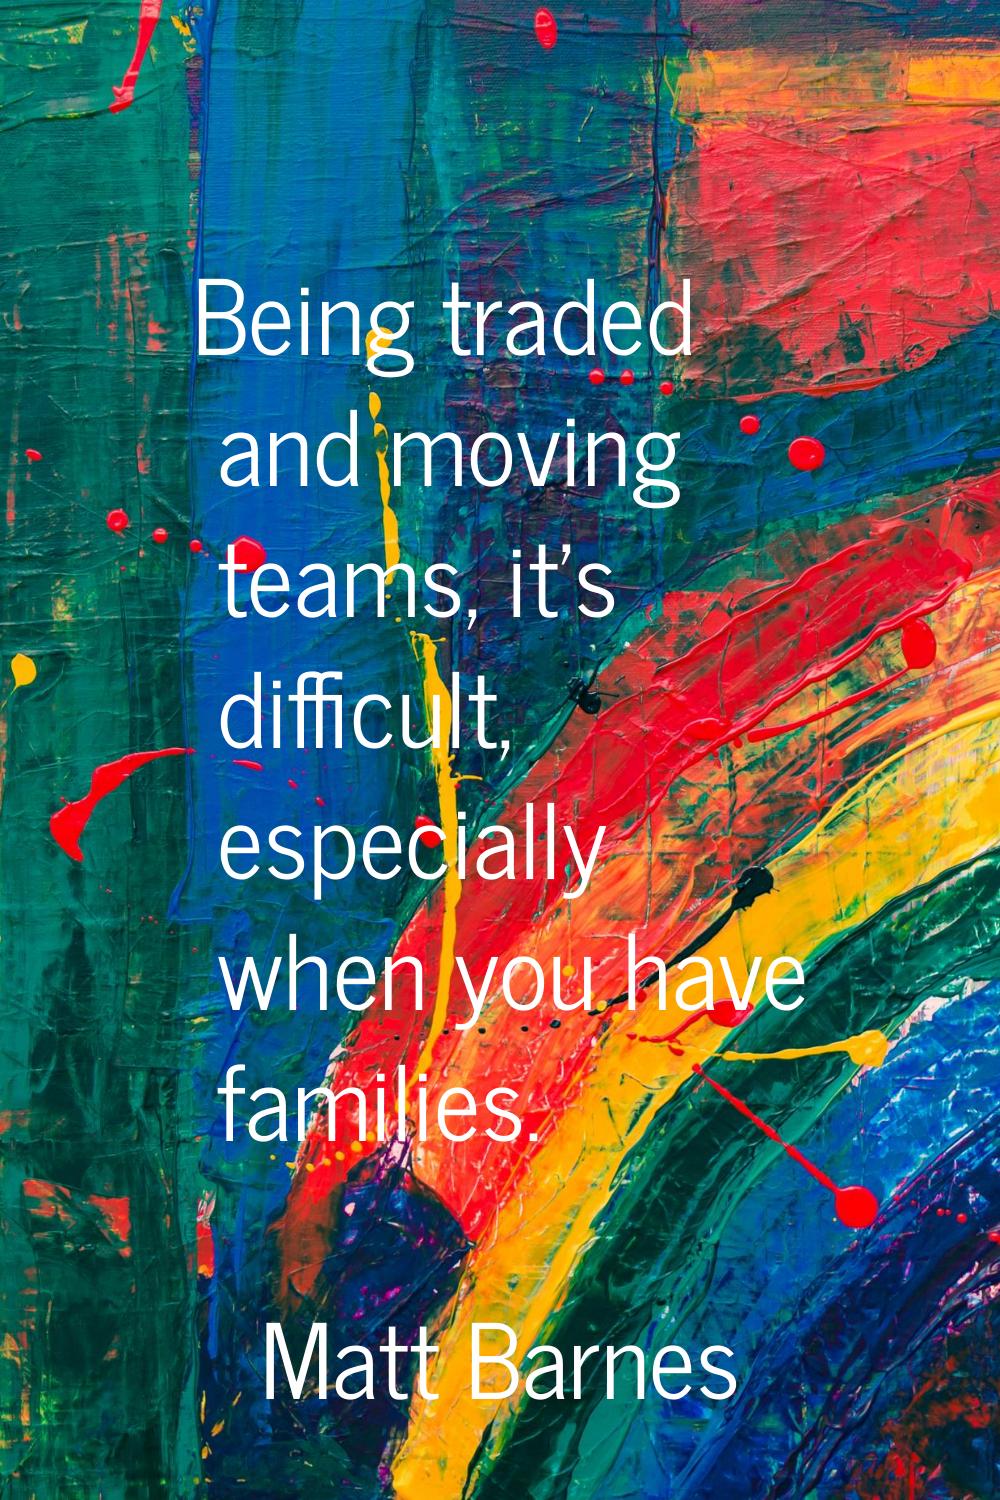 Being traded and moving teams, it's difficult, especially when you have families.